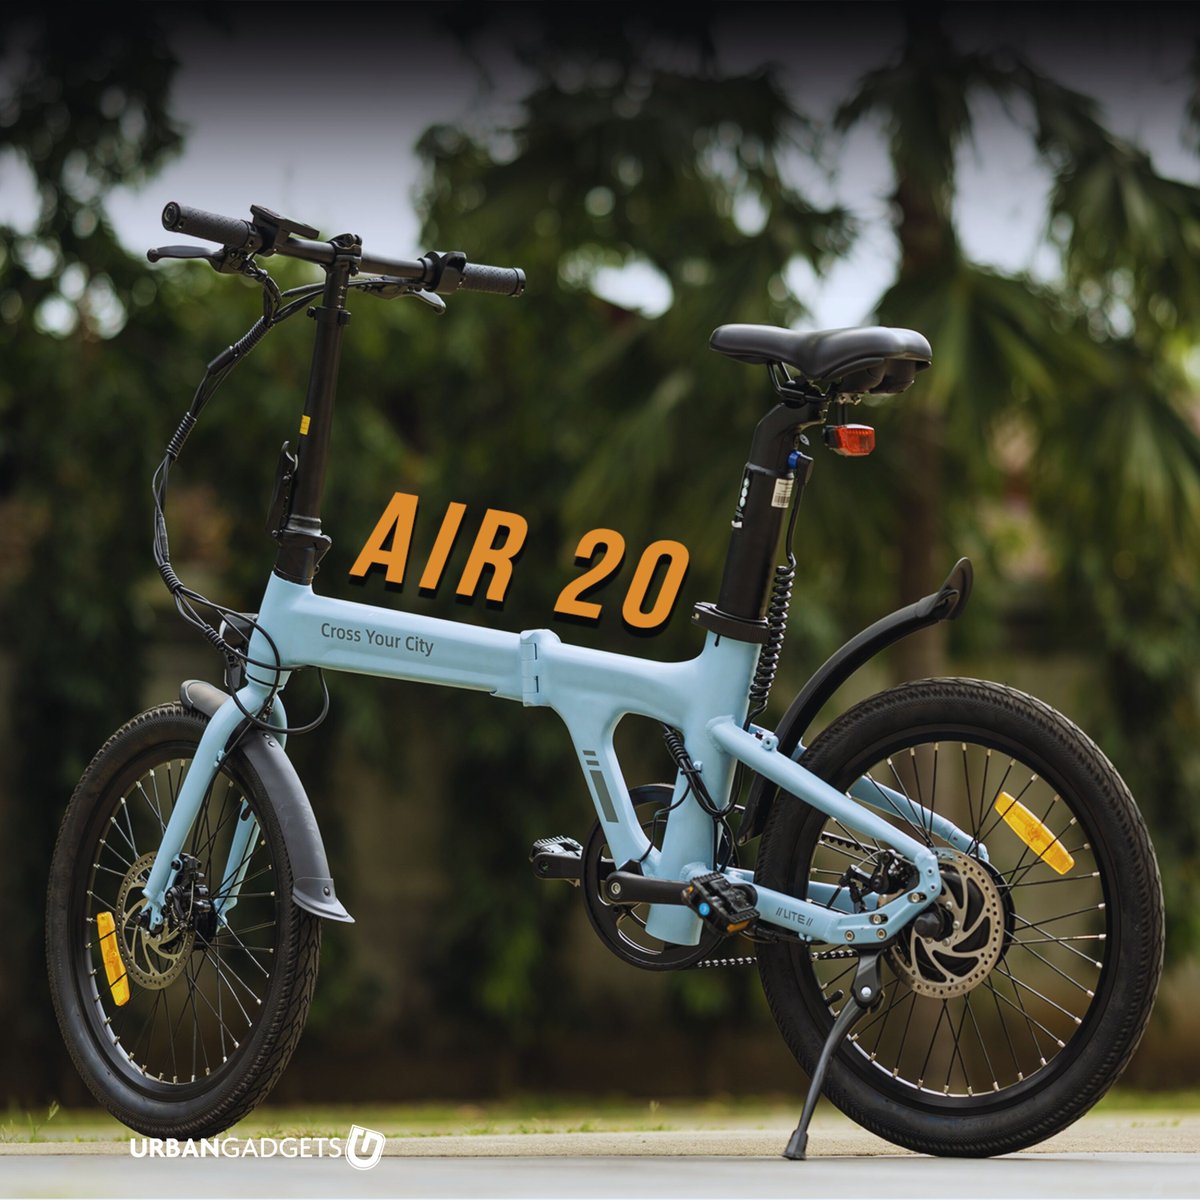 Choose ADO Air 20 Smart E-Bike for a fusion of innovation, style, and performance!

Shop Now: bit.ly/UG-AdoA20Lite

#UrbanGadgetsPH #ADO #SmartEBike #Air20 #ElectricBike #Ebikes #PedalAssist #CommuterBike #GreenTransportation #SustainableLiving #CarbonFreeCommute